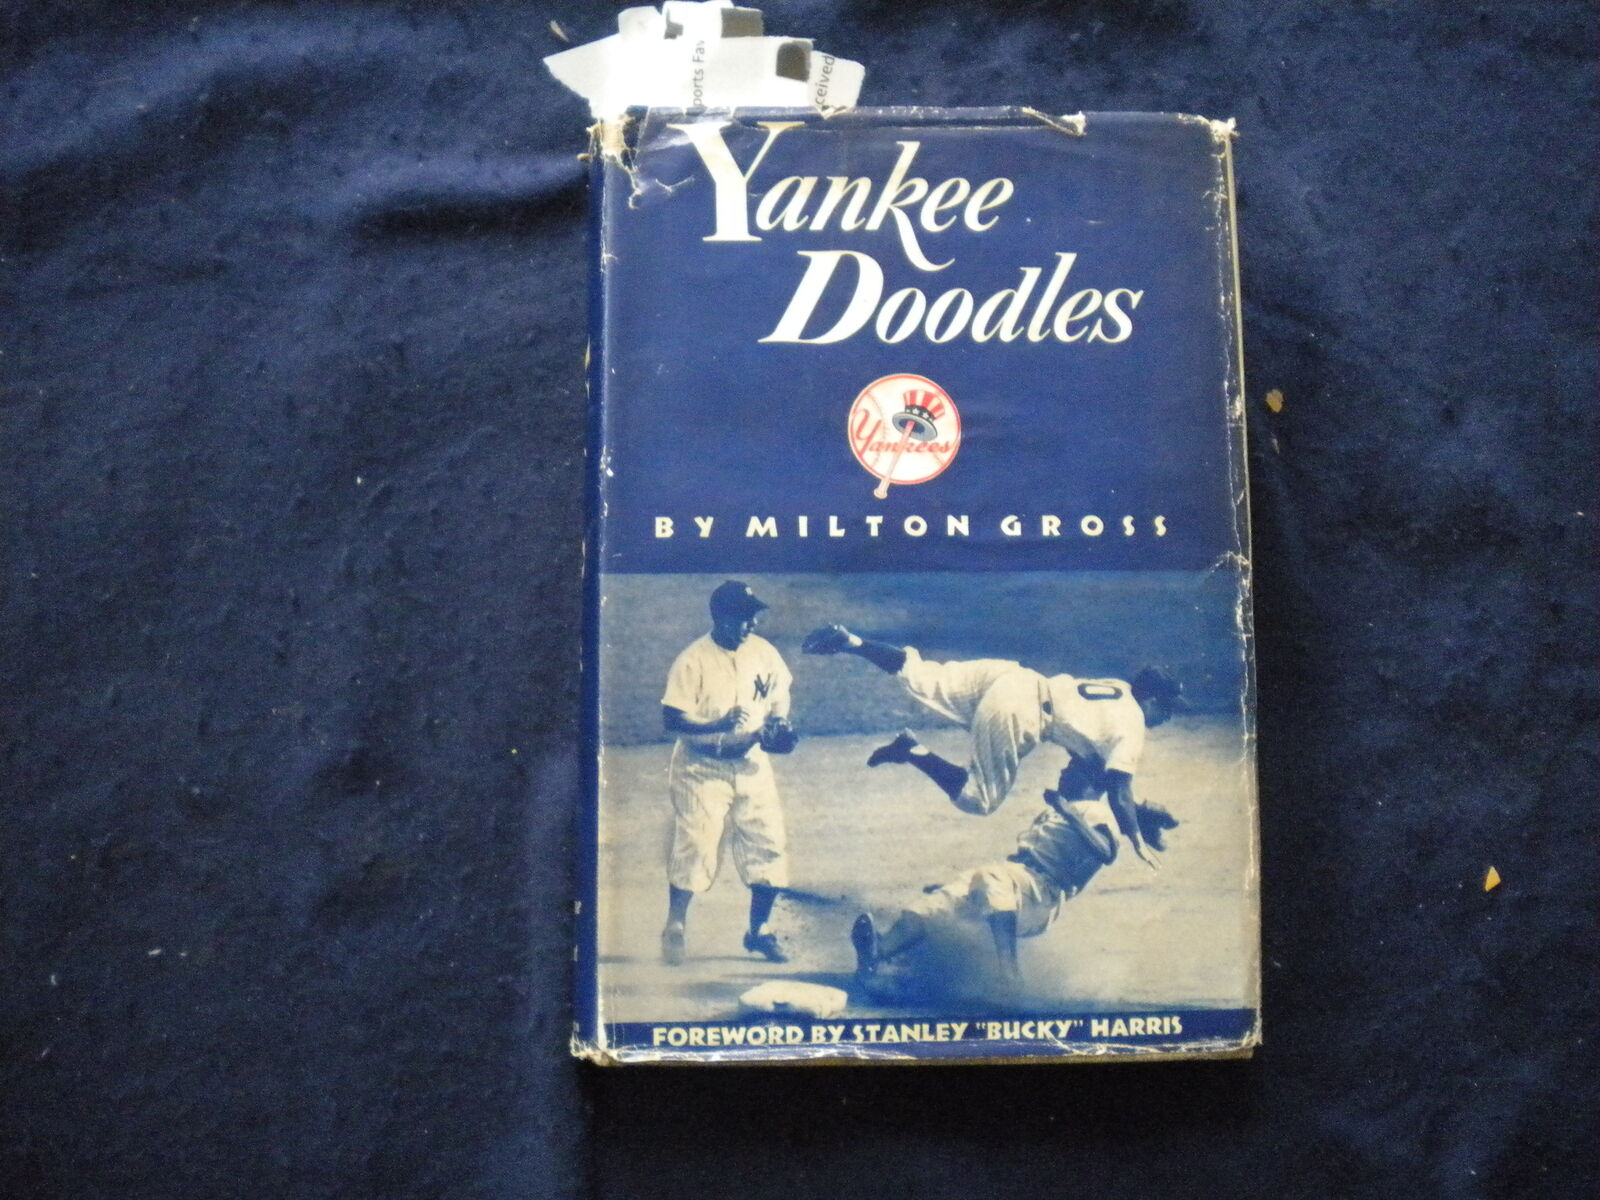 1948 YANKEE DOODLES HARDCOVER BOOK BY MILTON GROSS - KD 8118